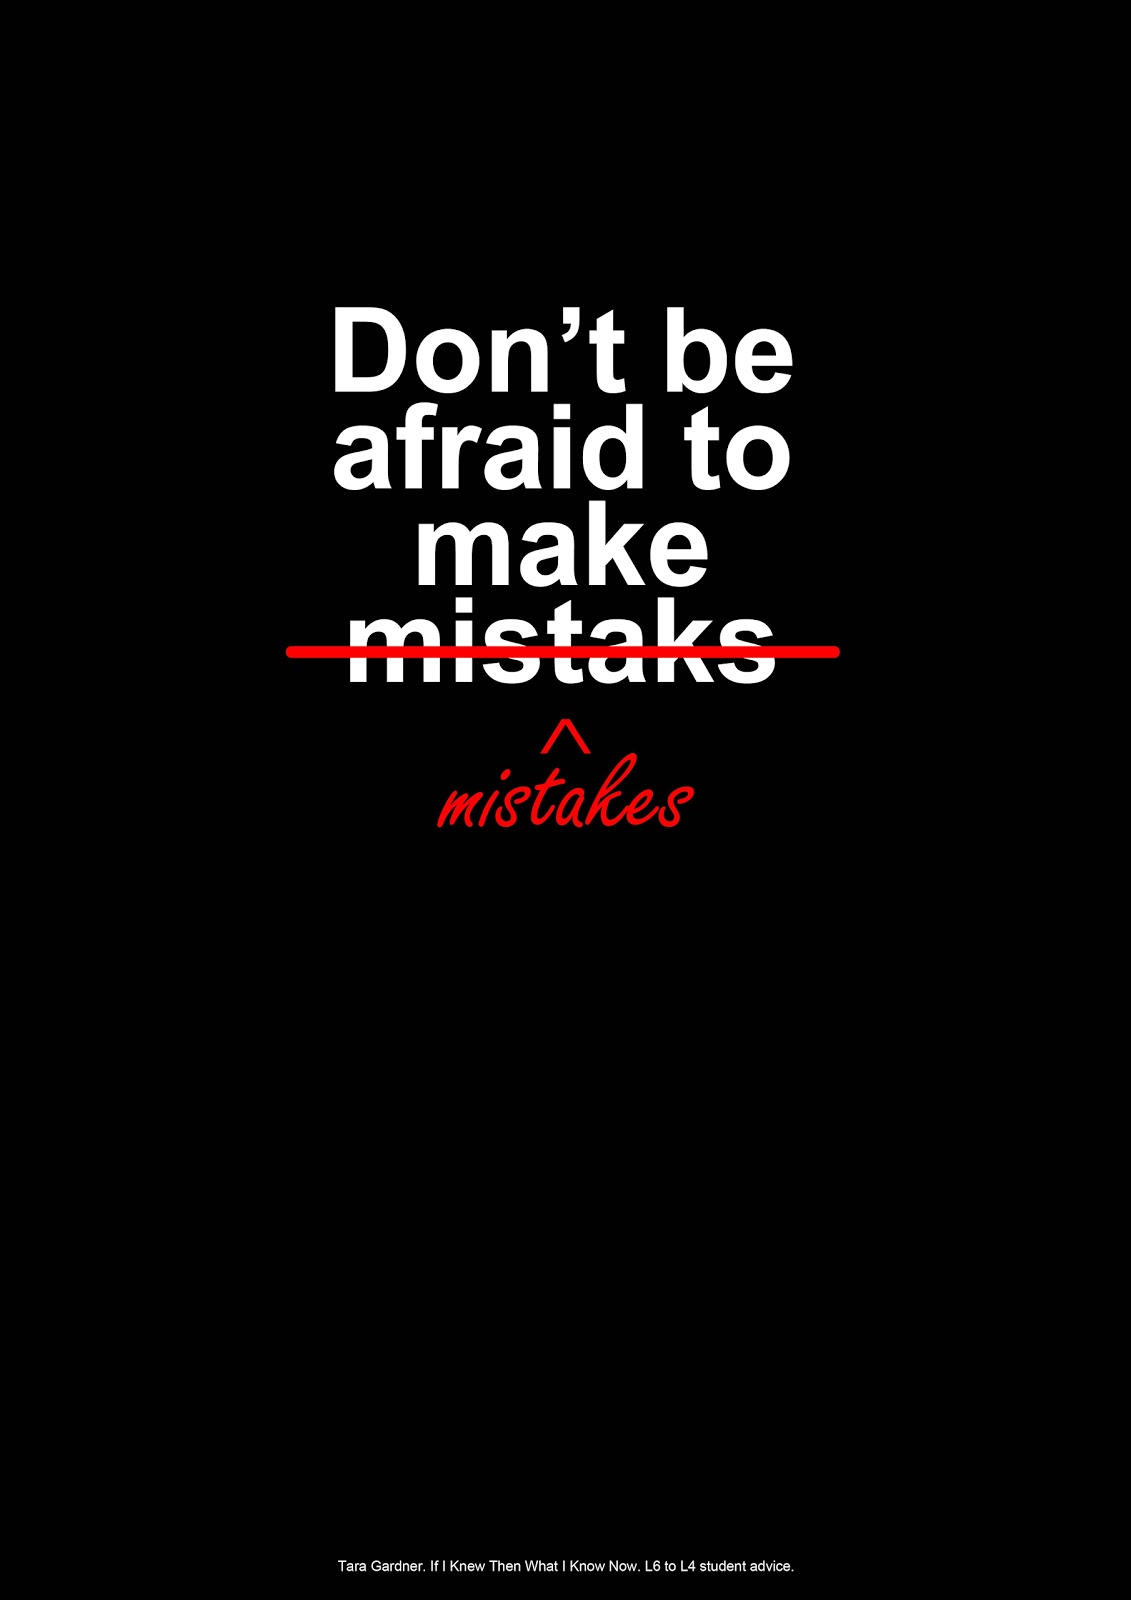 Afraid of something. Don't be afraid ангел. Don't be afraid of making mistakes.